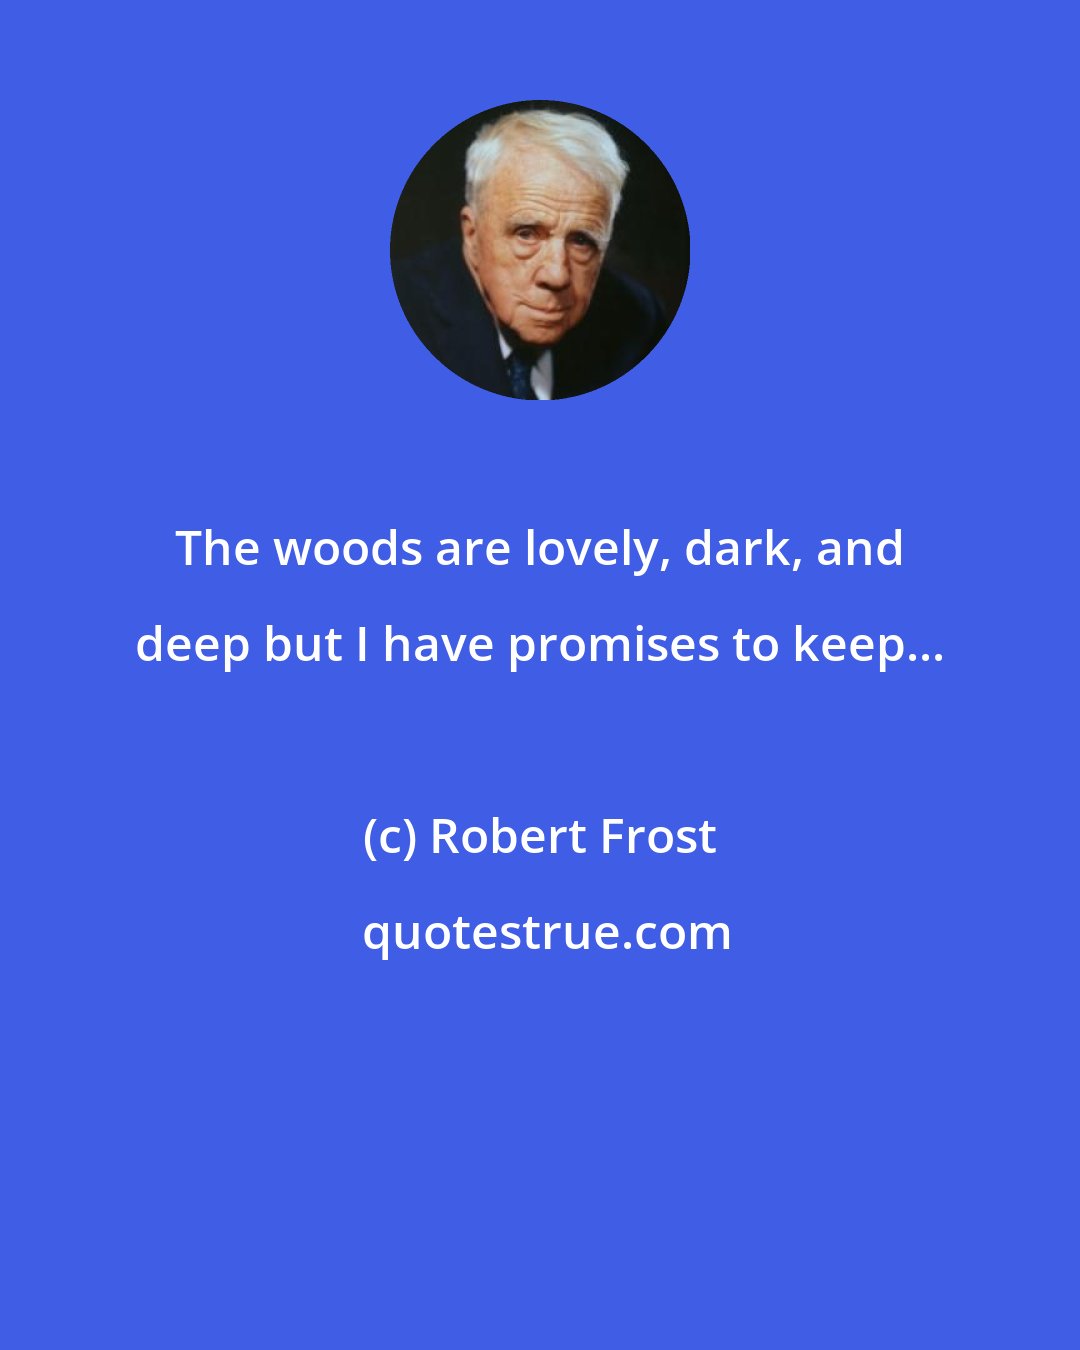 Robert Frost: The woods are lovely, dark, and deep but I have promises to keep...